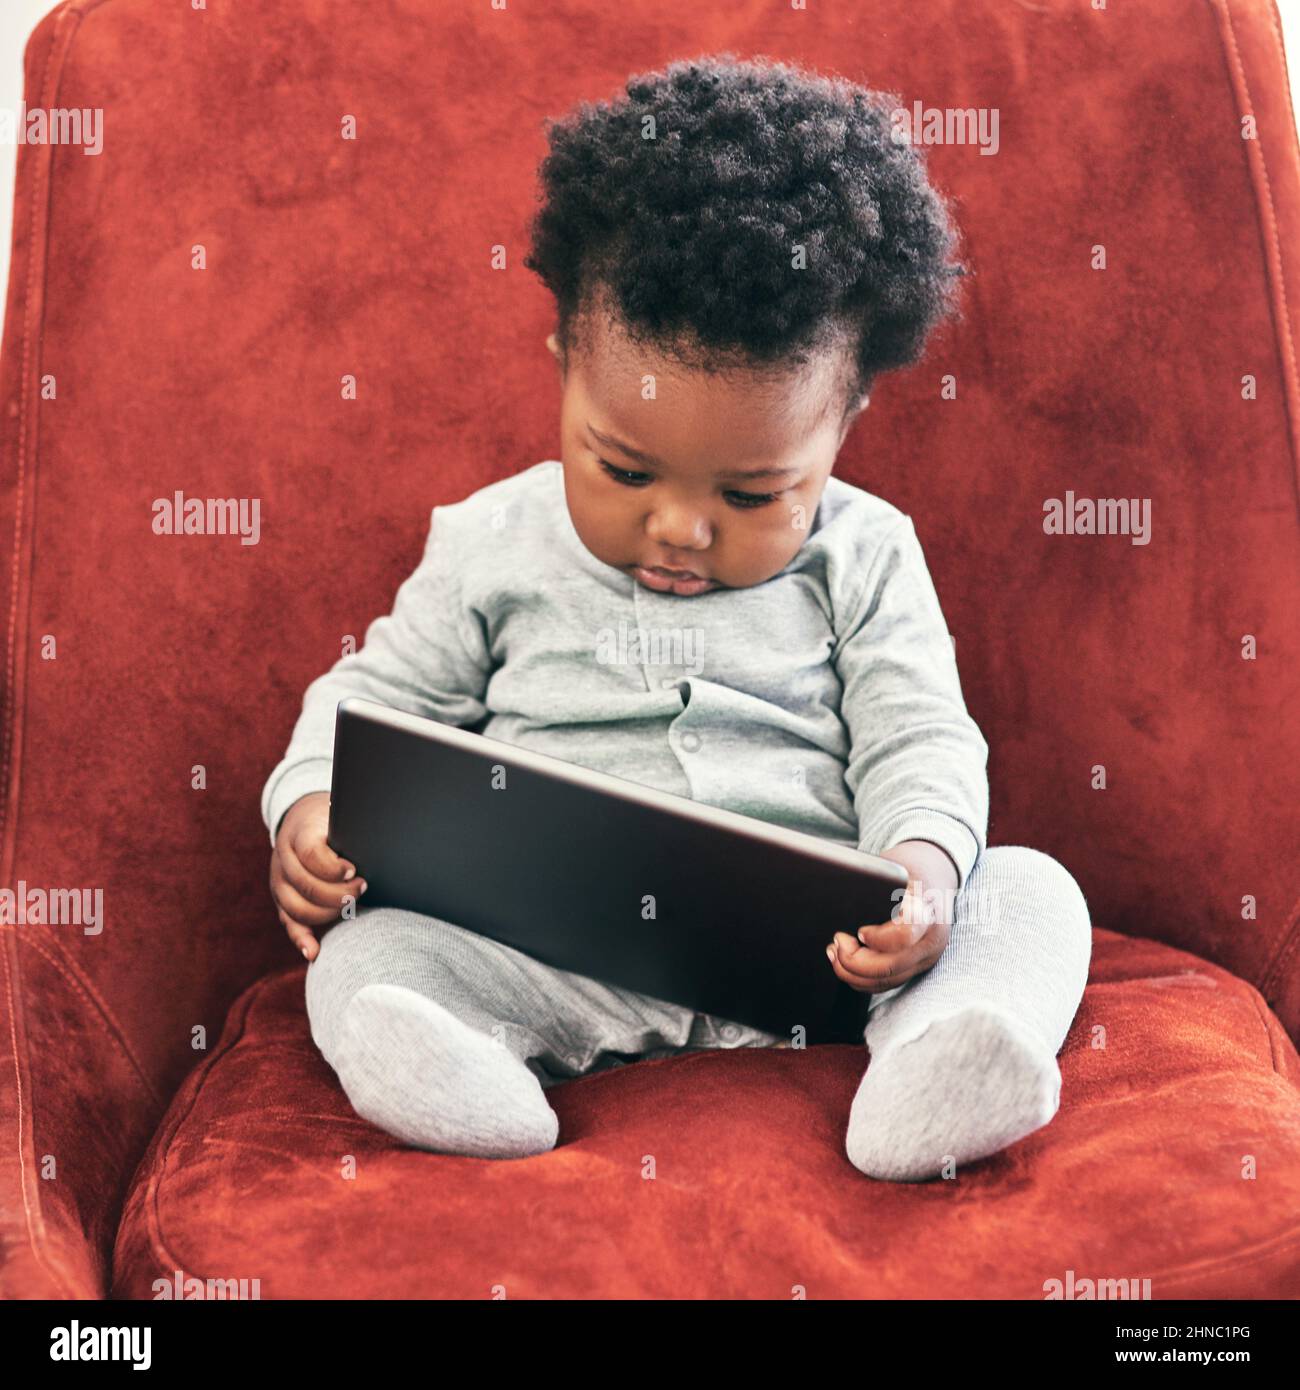 I need to check my emails.... Shot of a little baby boy sitting in a chair holding a digital tablet. Stock Photo